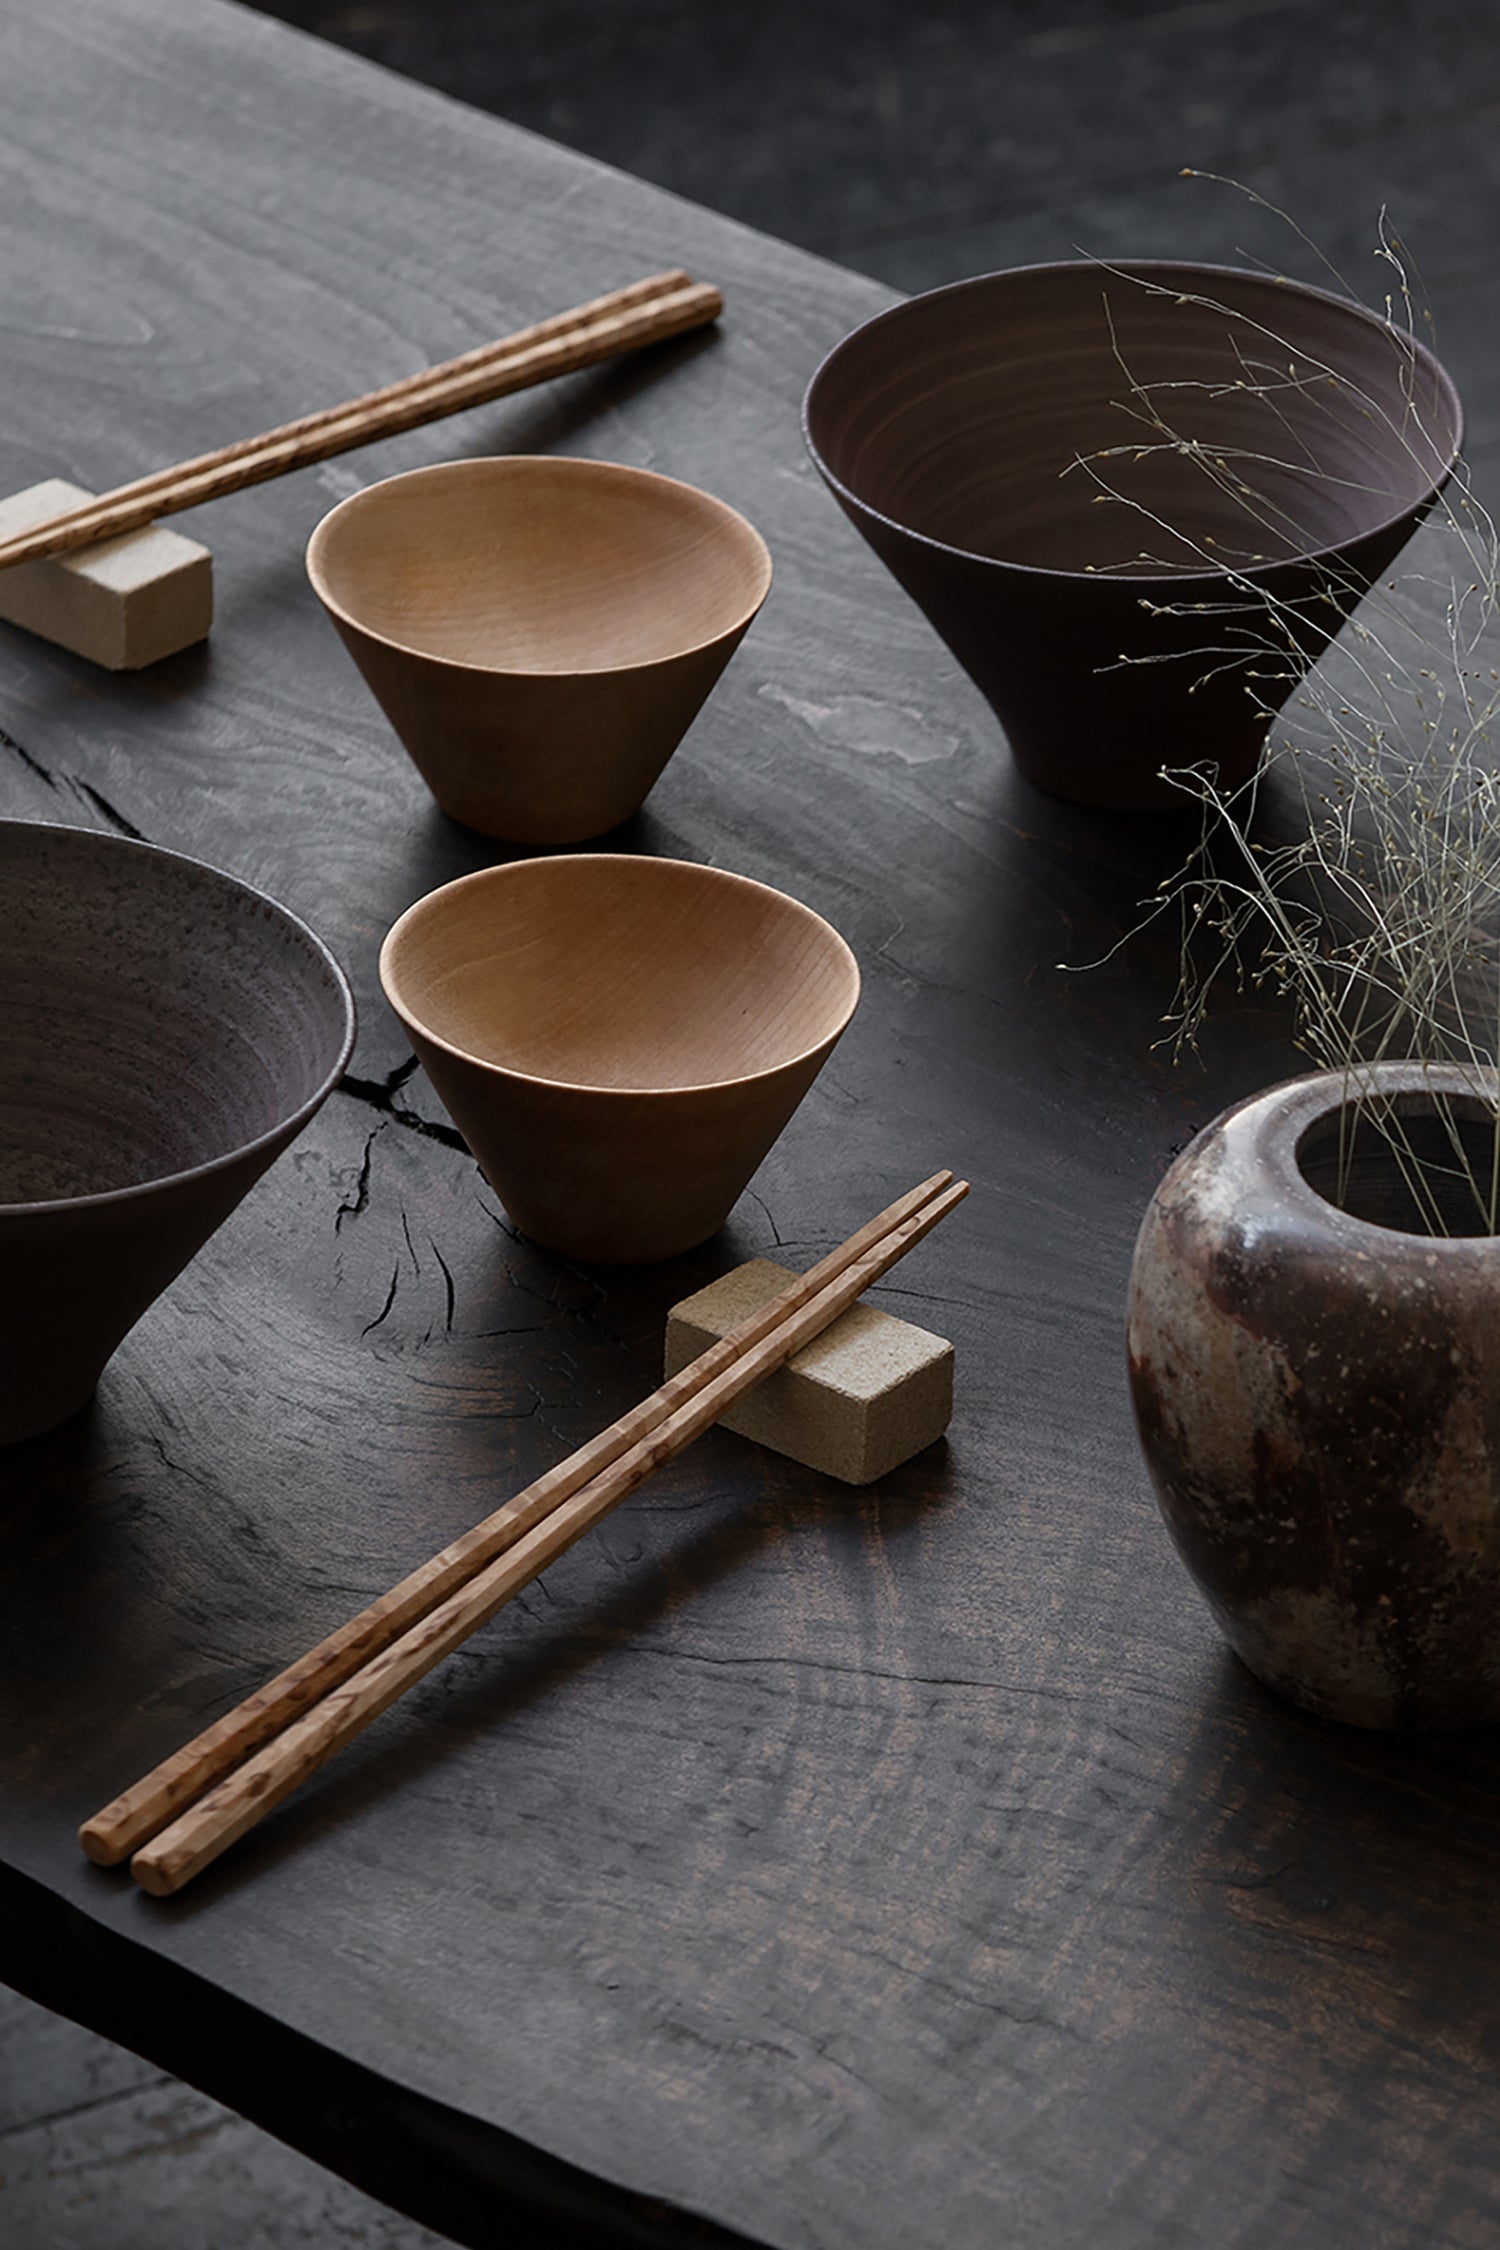 A Japanese styled table setting with chopsticks and wooden bowls by Bonni Bonne